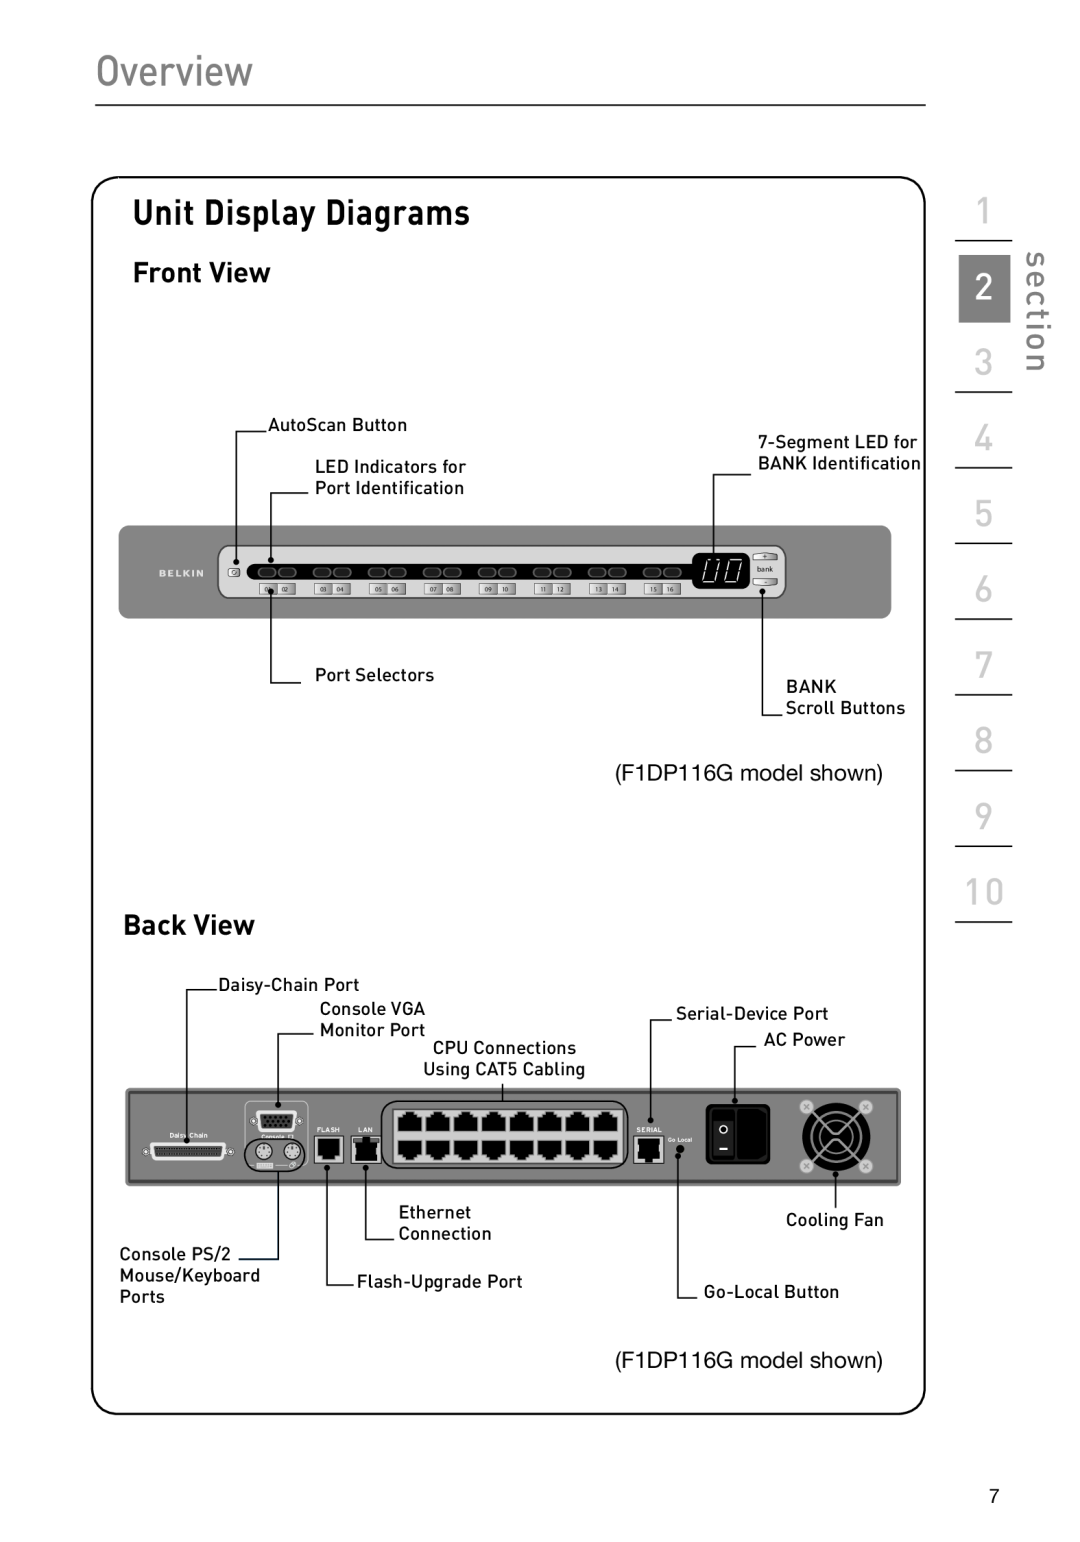 Belkin F1DP108G user manual Unit Display Diagrams, Front View, Back View, Overview, section 